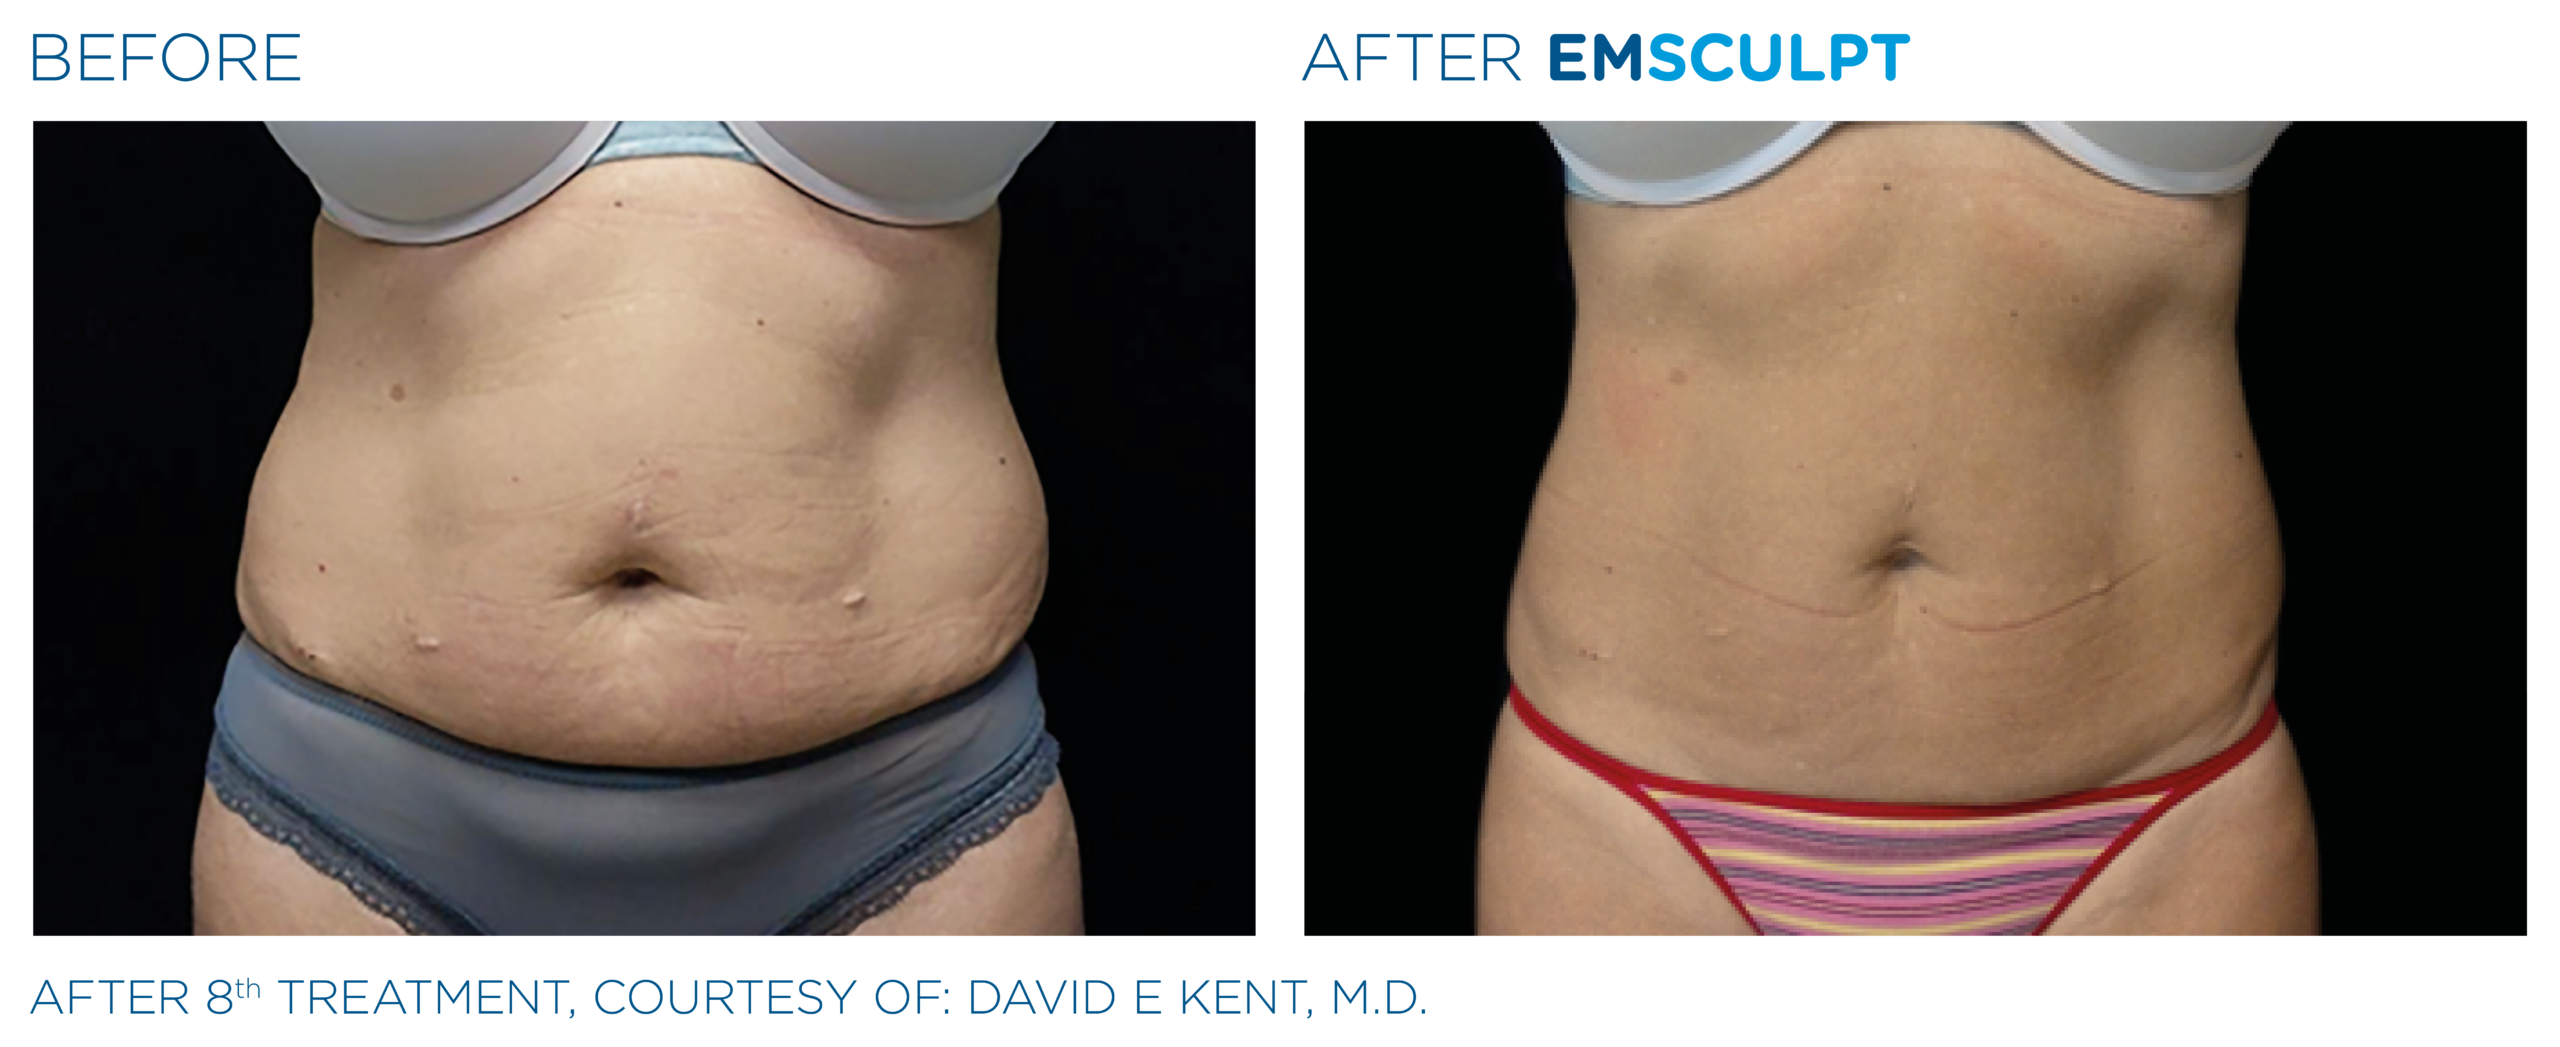 EmSculpt Body Sculpting for a dramatic tummy tuck before and after transformation.